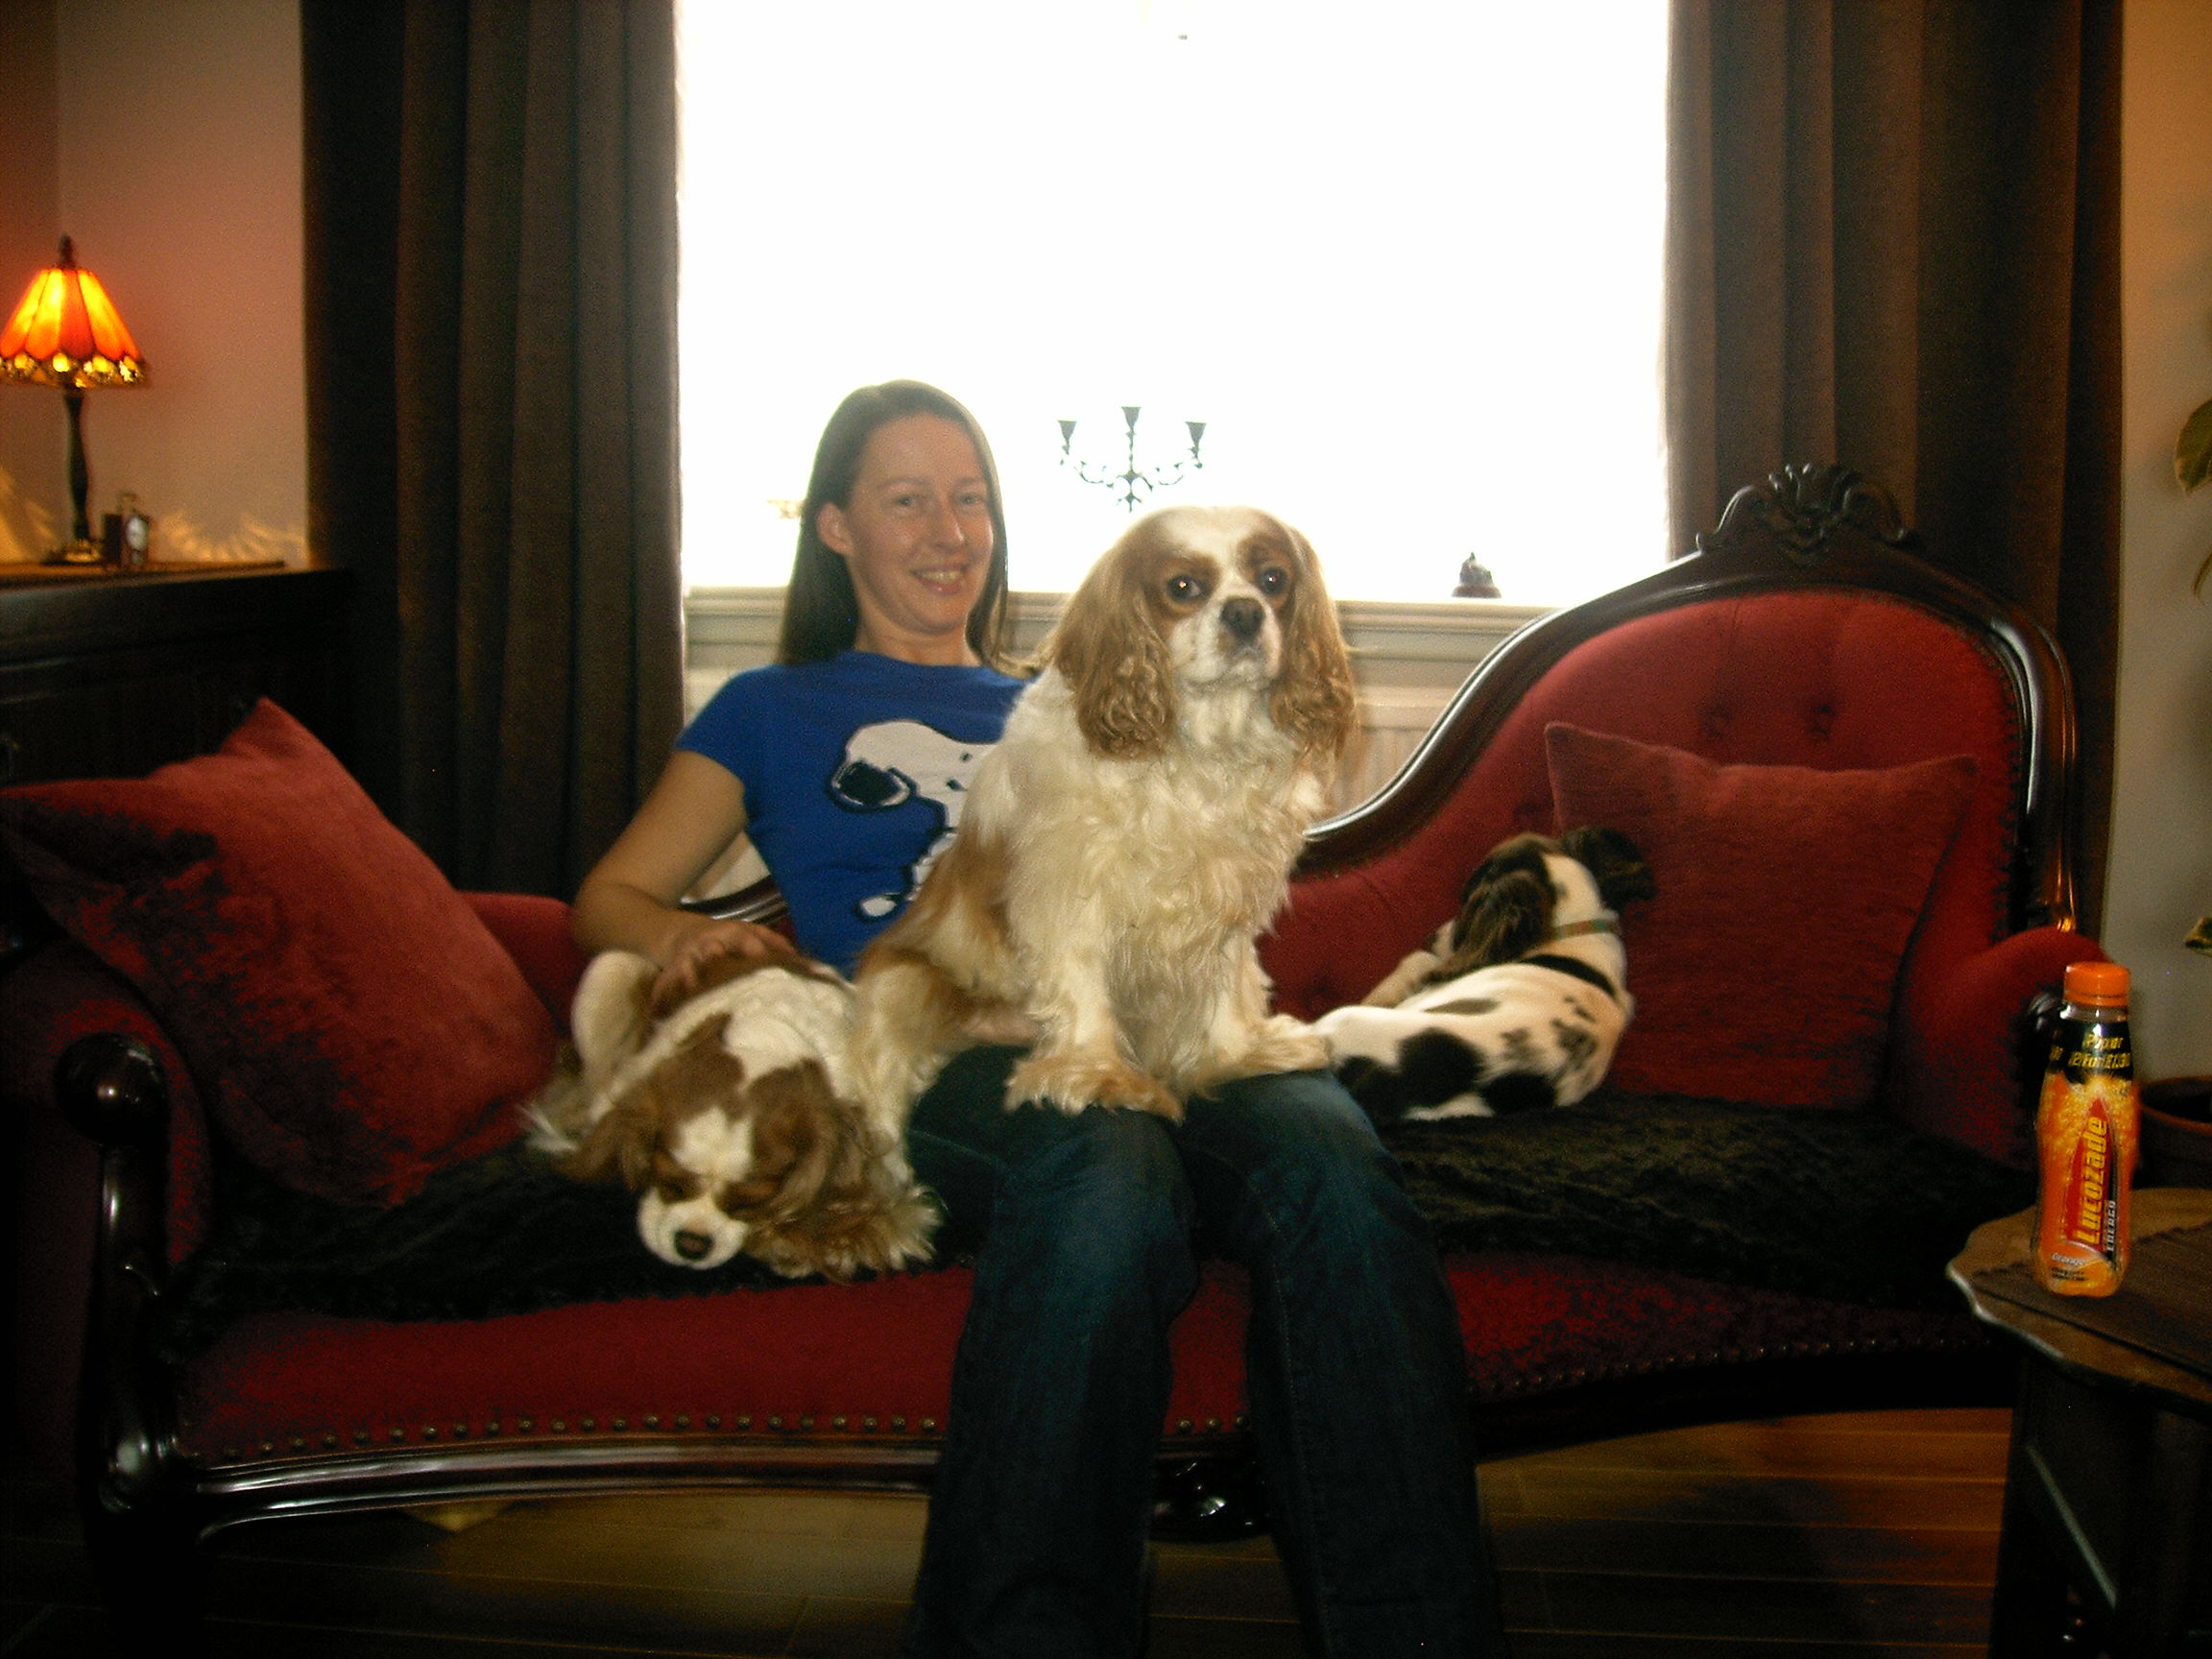 Laura is a member of the National Association of Registered Petsitters